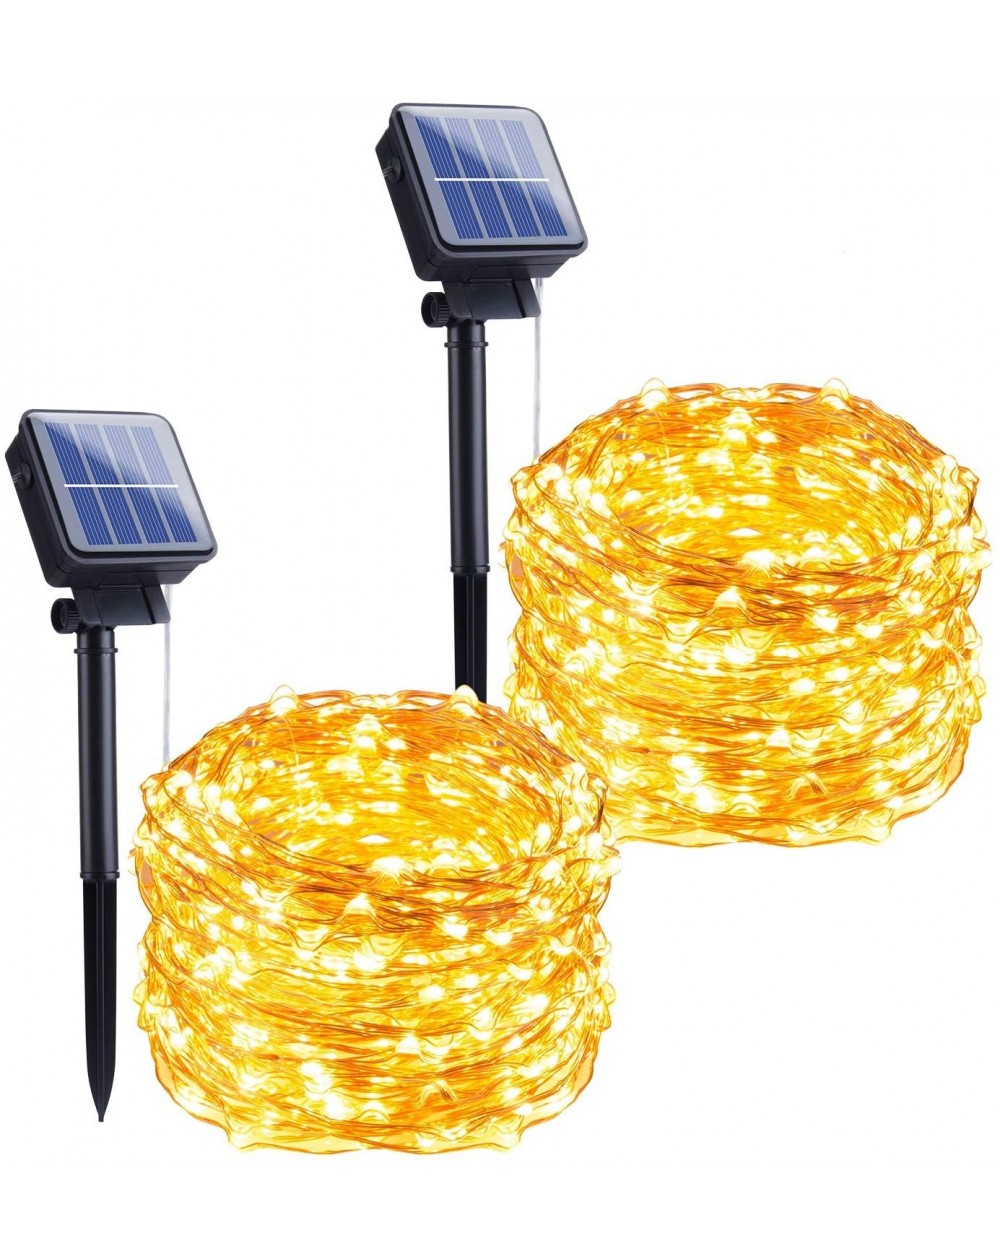 Outdoor String Lights Outdoor Solar String Lights- 2 Pack 33FT 100 LED Solar Powered Fairy Lights with 8 Lighting Modes Water...